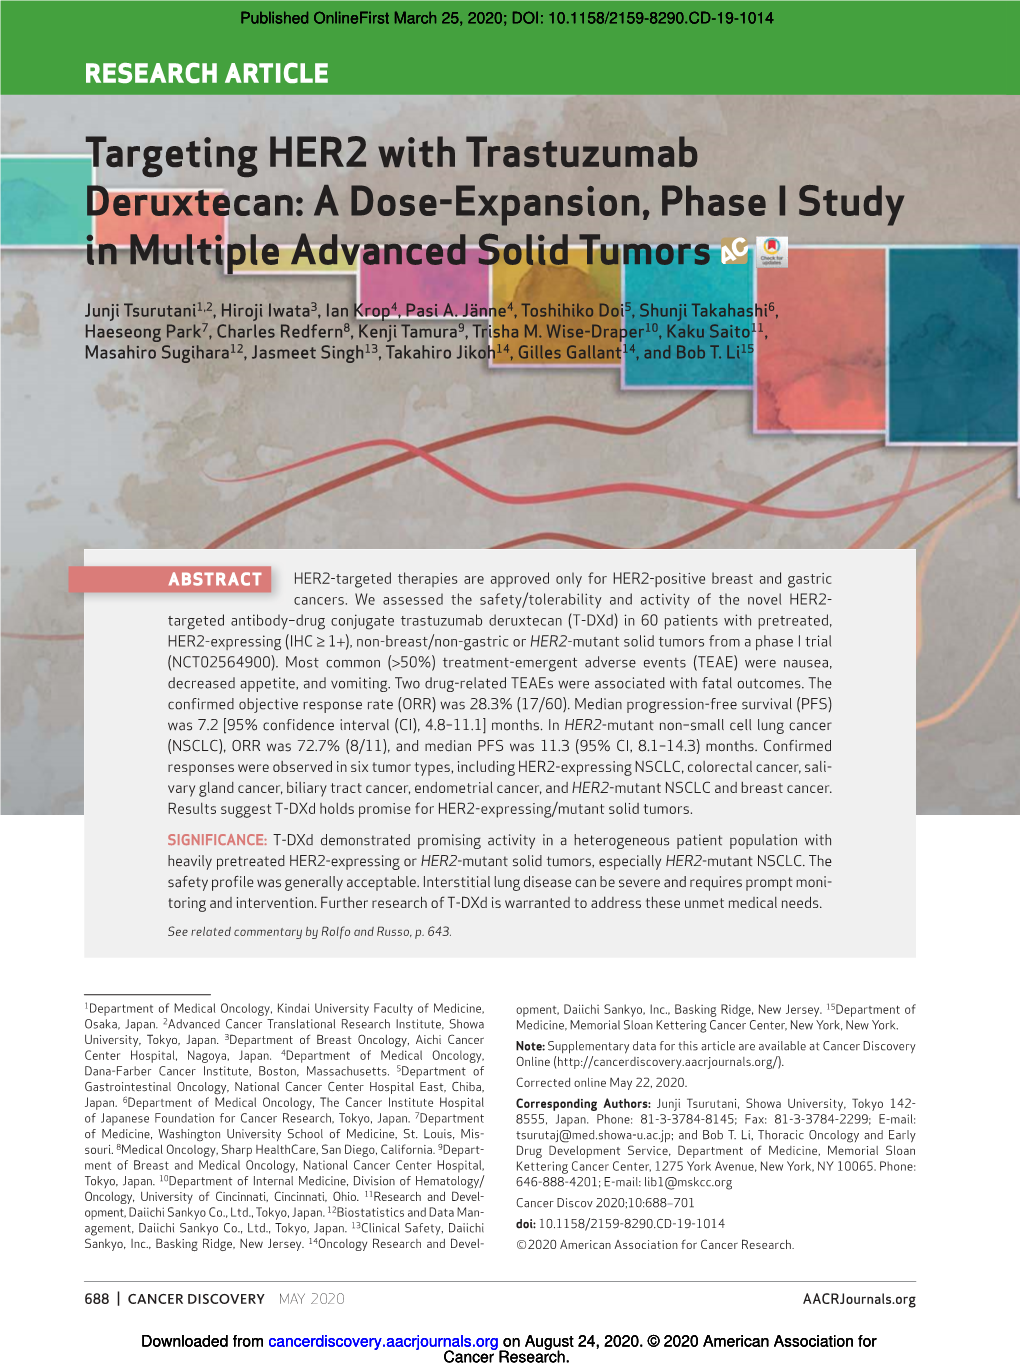 Targeting HER2 with Trastuzumab Deruxtecan: a Dose-Expansion, Phase I Study in Multiple Advanced Solid Tumors